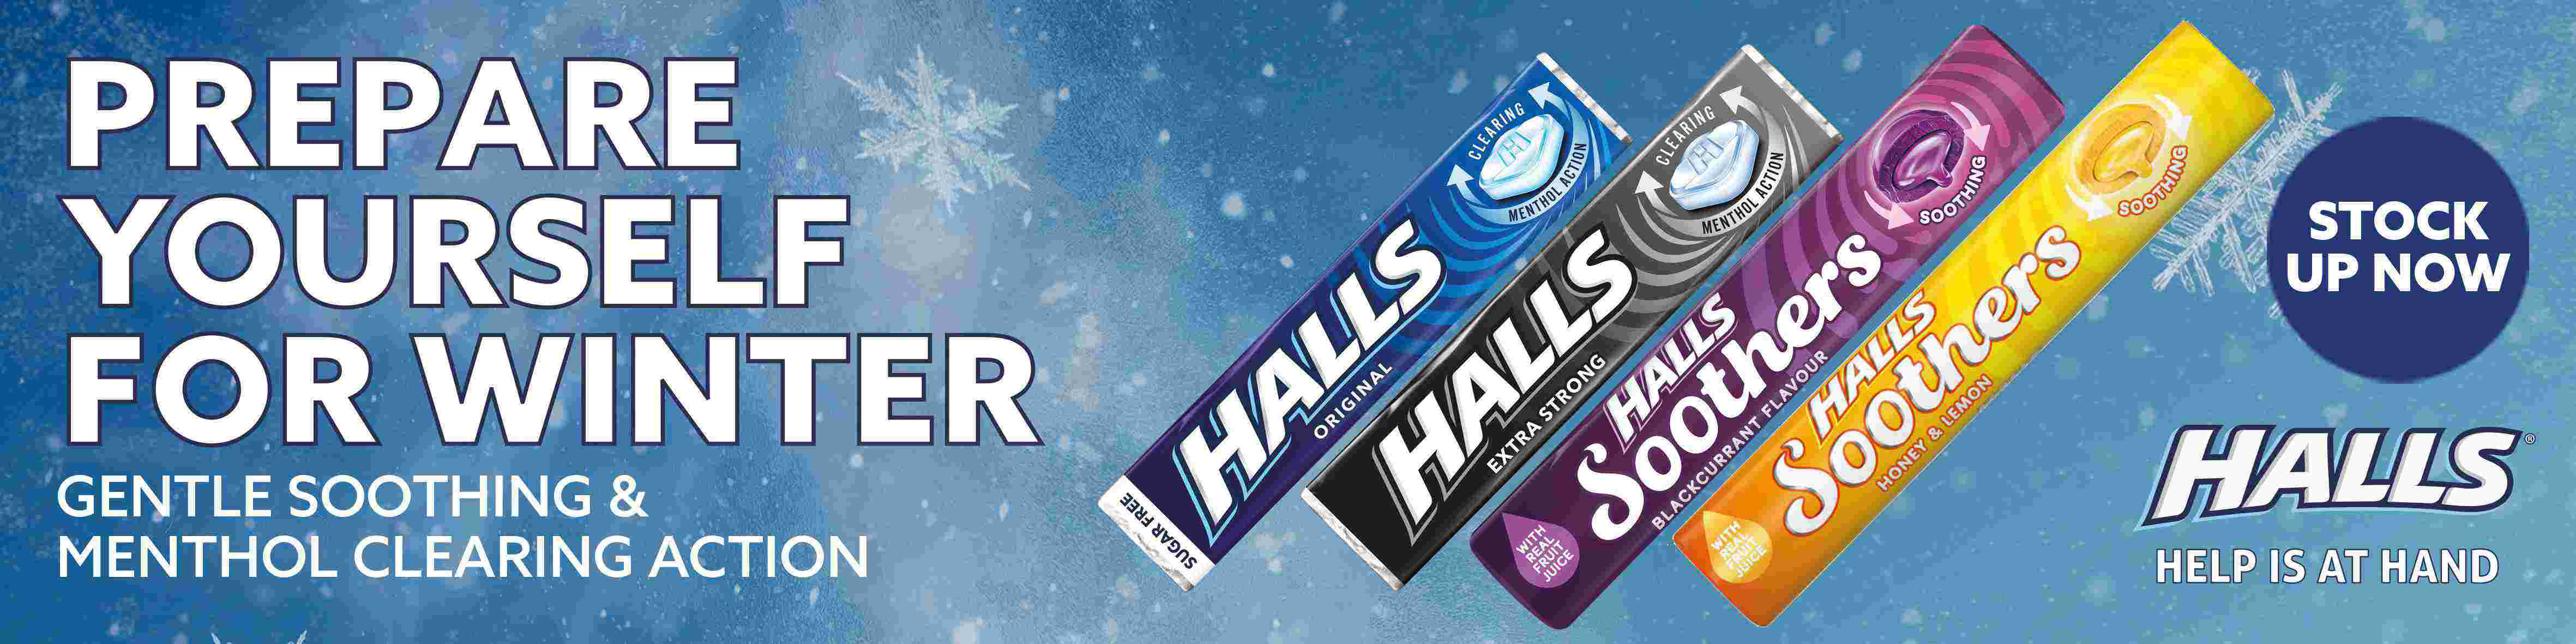 Halls Gentle Soothing Menthol Clear